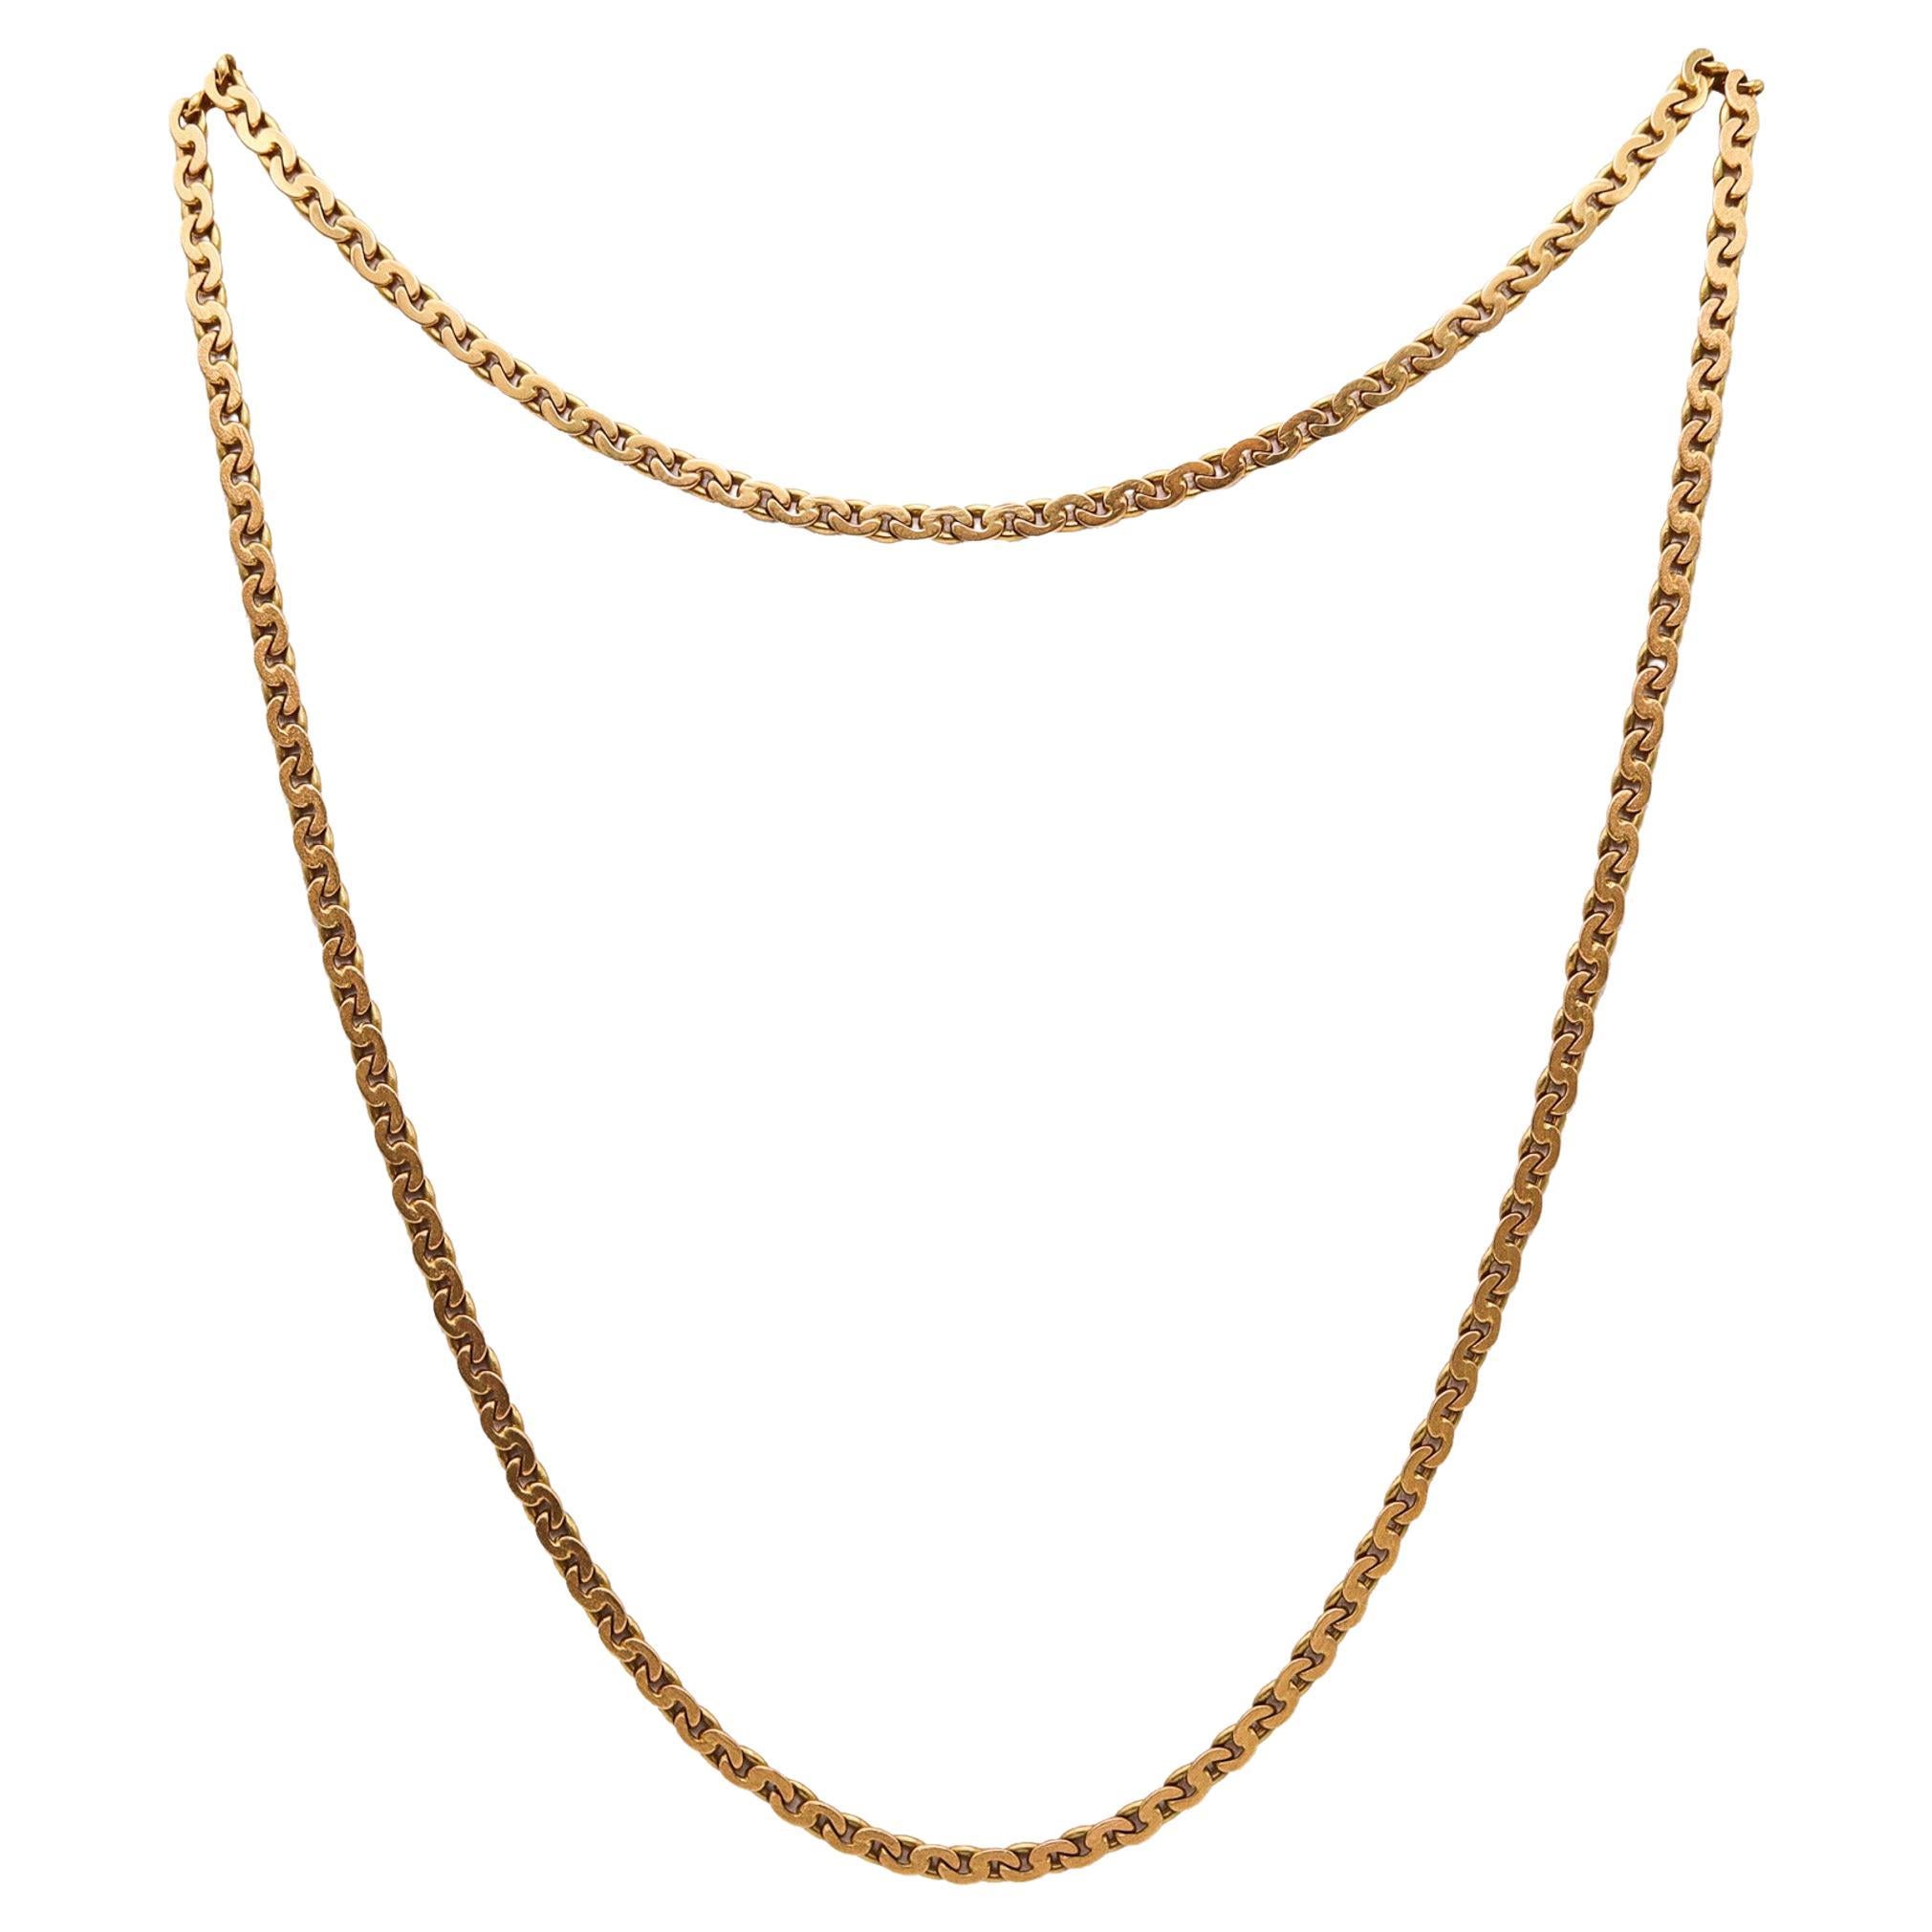 Marchisio Napoleone 1935 Italian Art Deco Long Chain In Solid 18Kt Yellow Gold For Sale